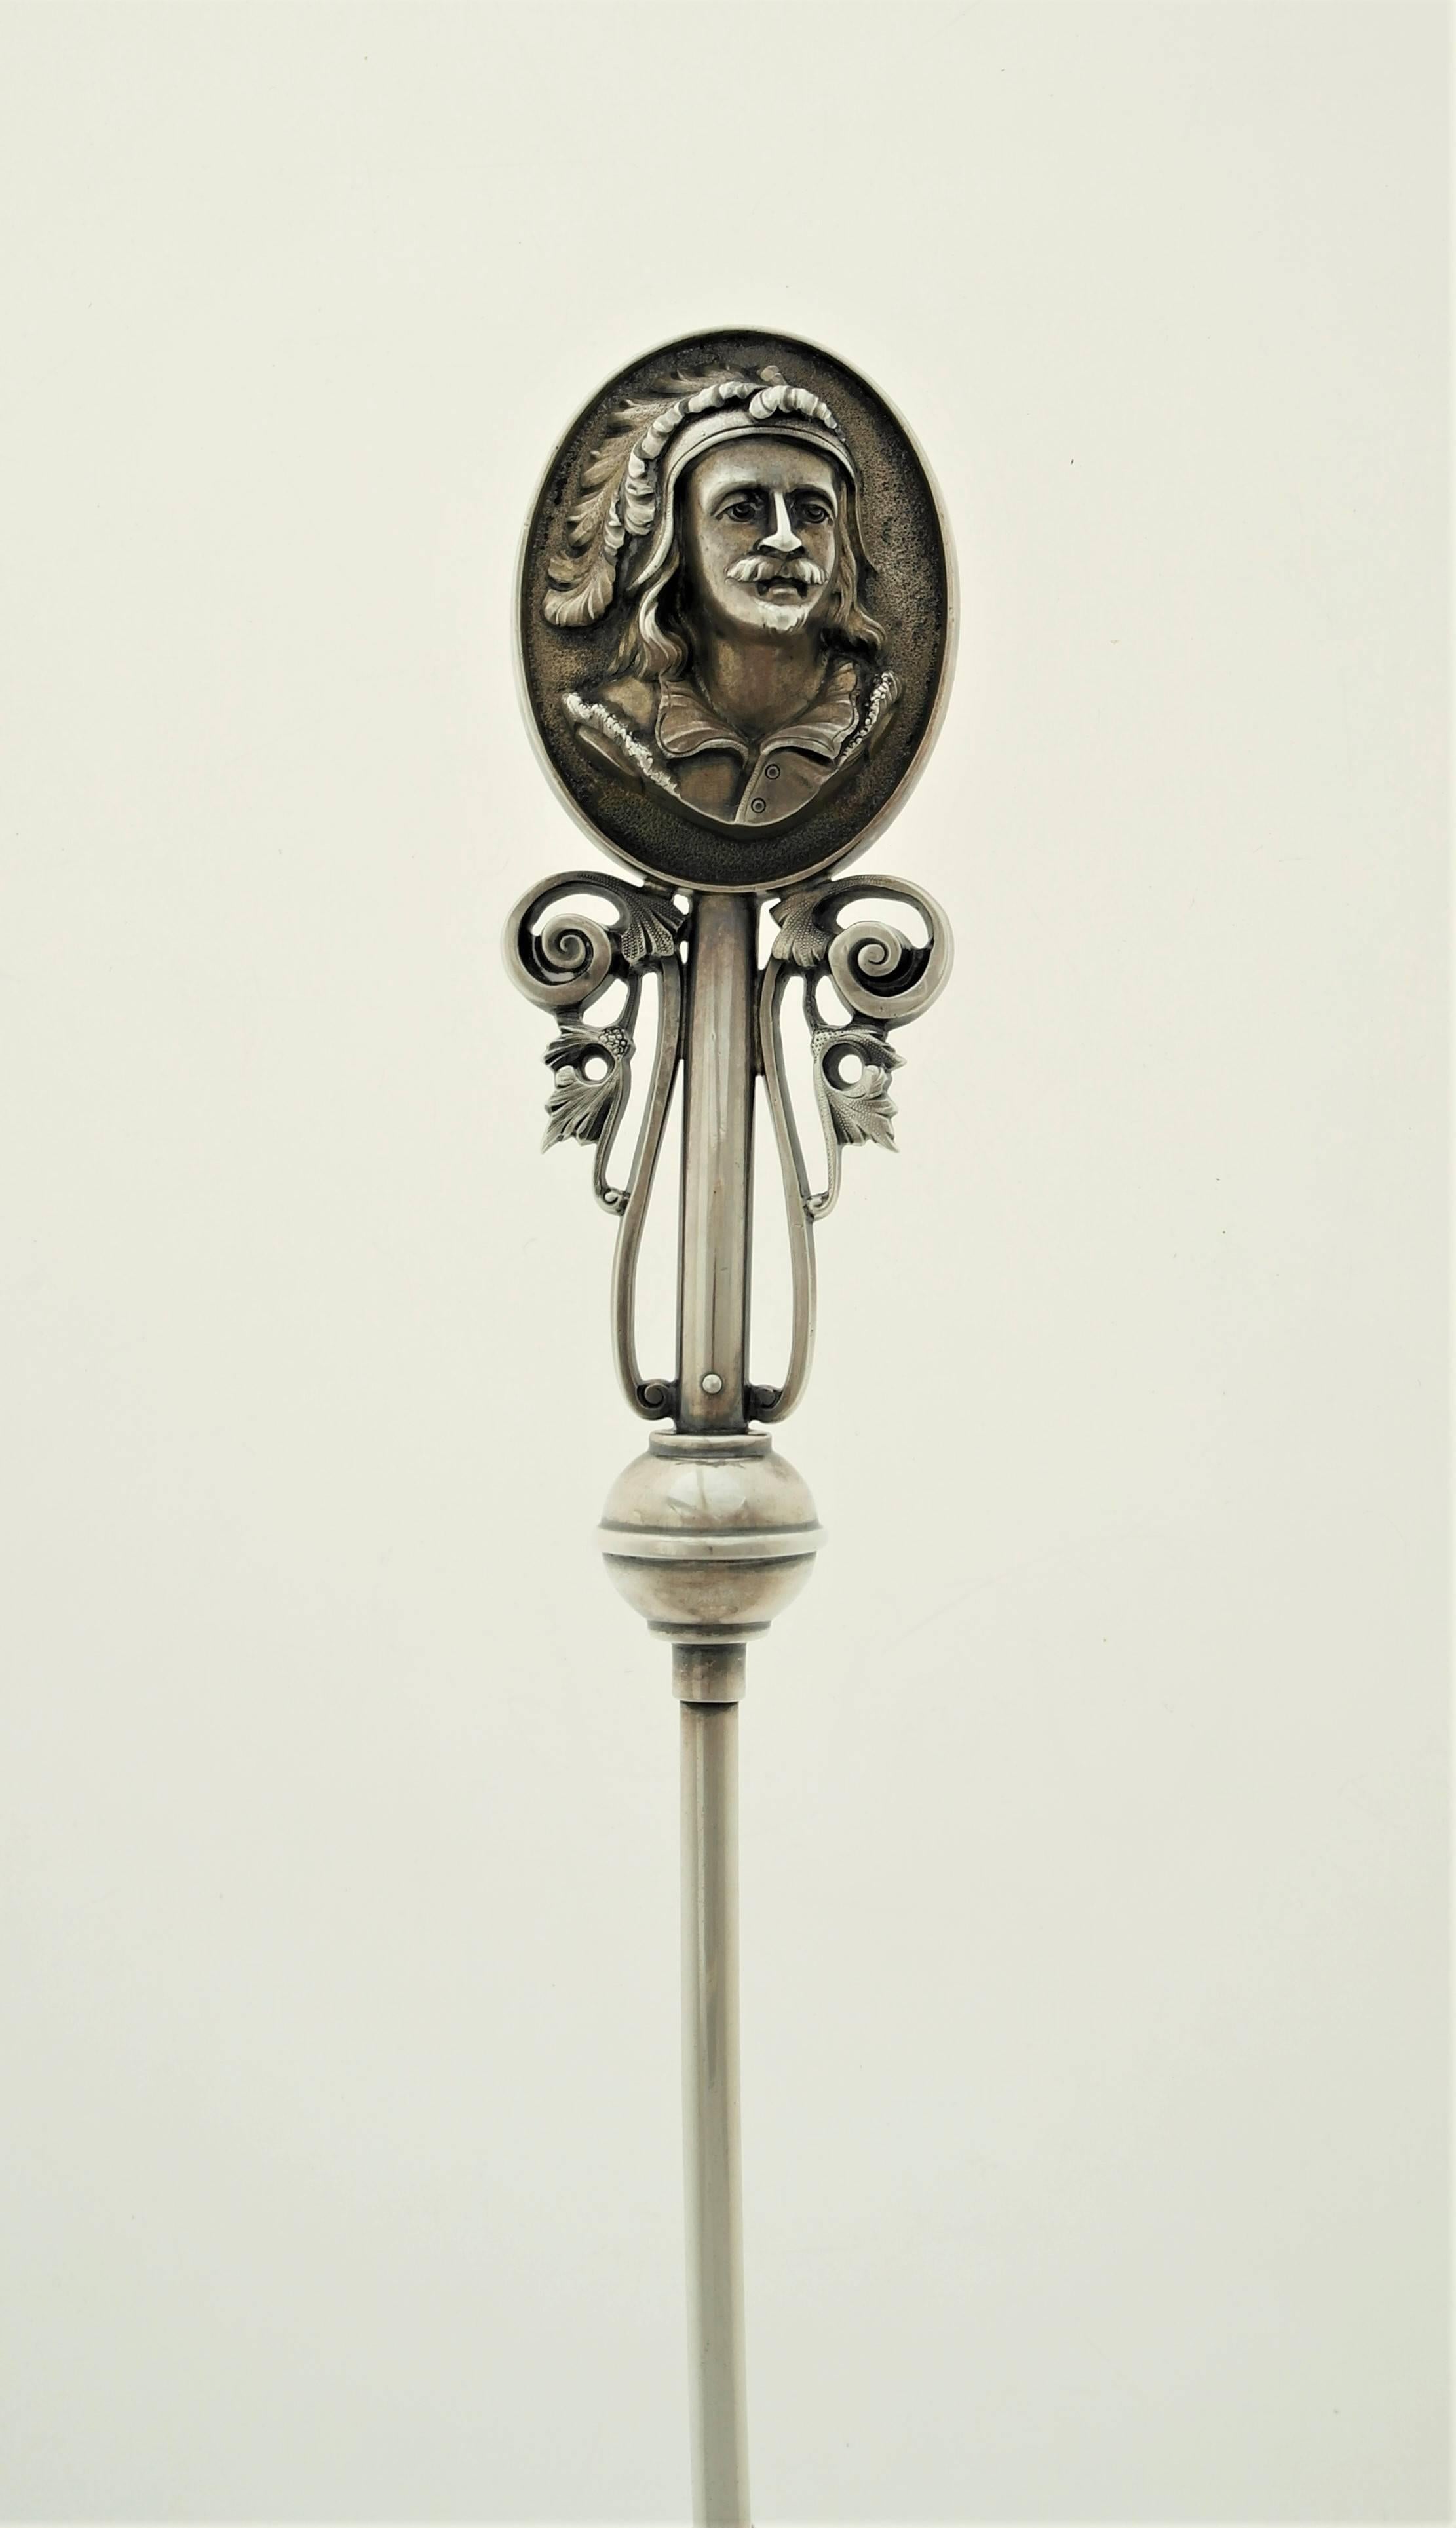 A circa 1860 coin silver soup ladle made by Wood & Hughes of New York. In the medallion pattern with bust of a soldier in high relief; round stem and trefoil fluted bowl. Measures: Length 15 inches; bowl 5 inches wide by 4 inches deep. In excellent